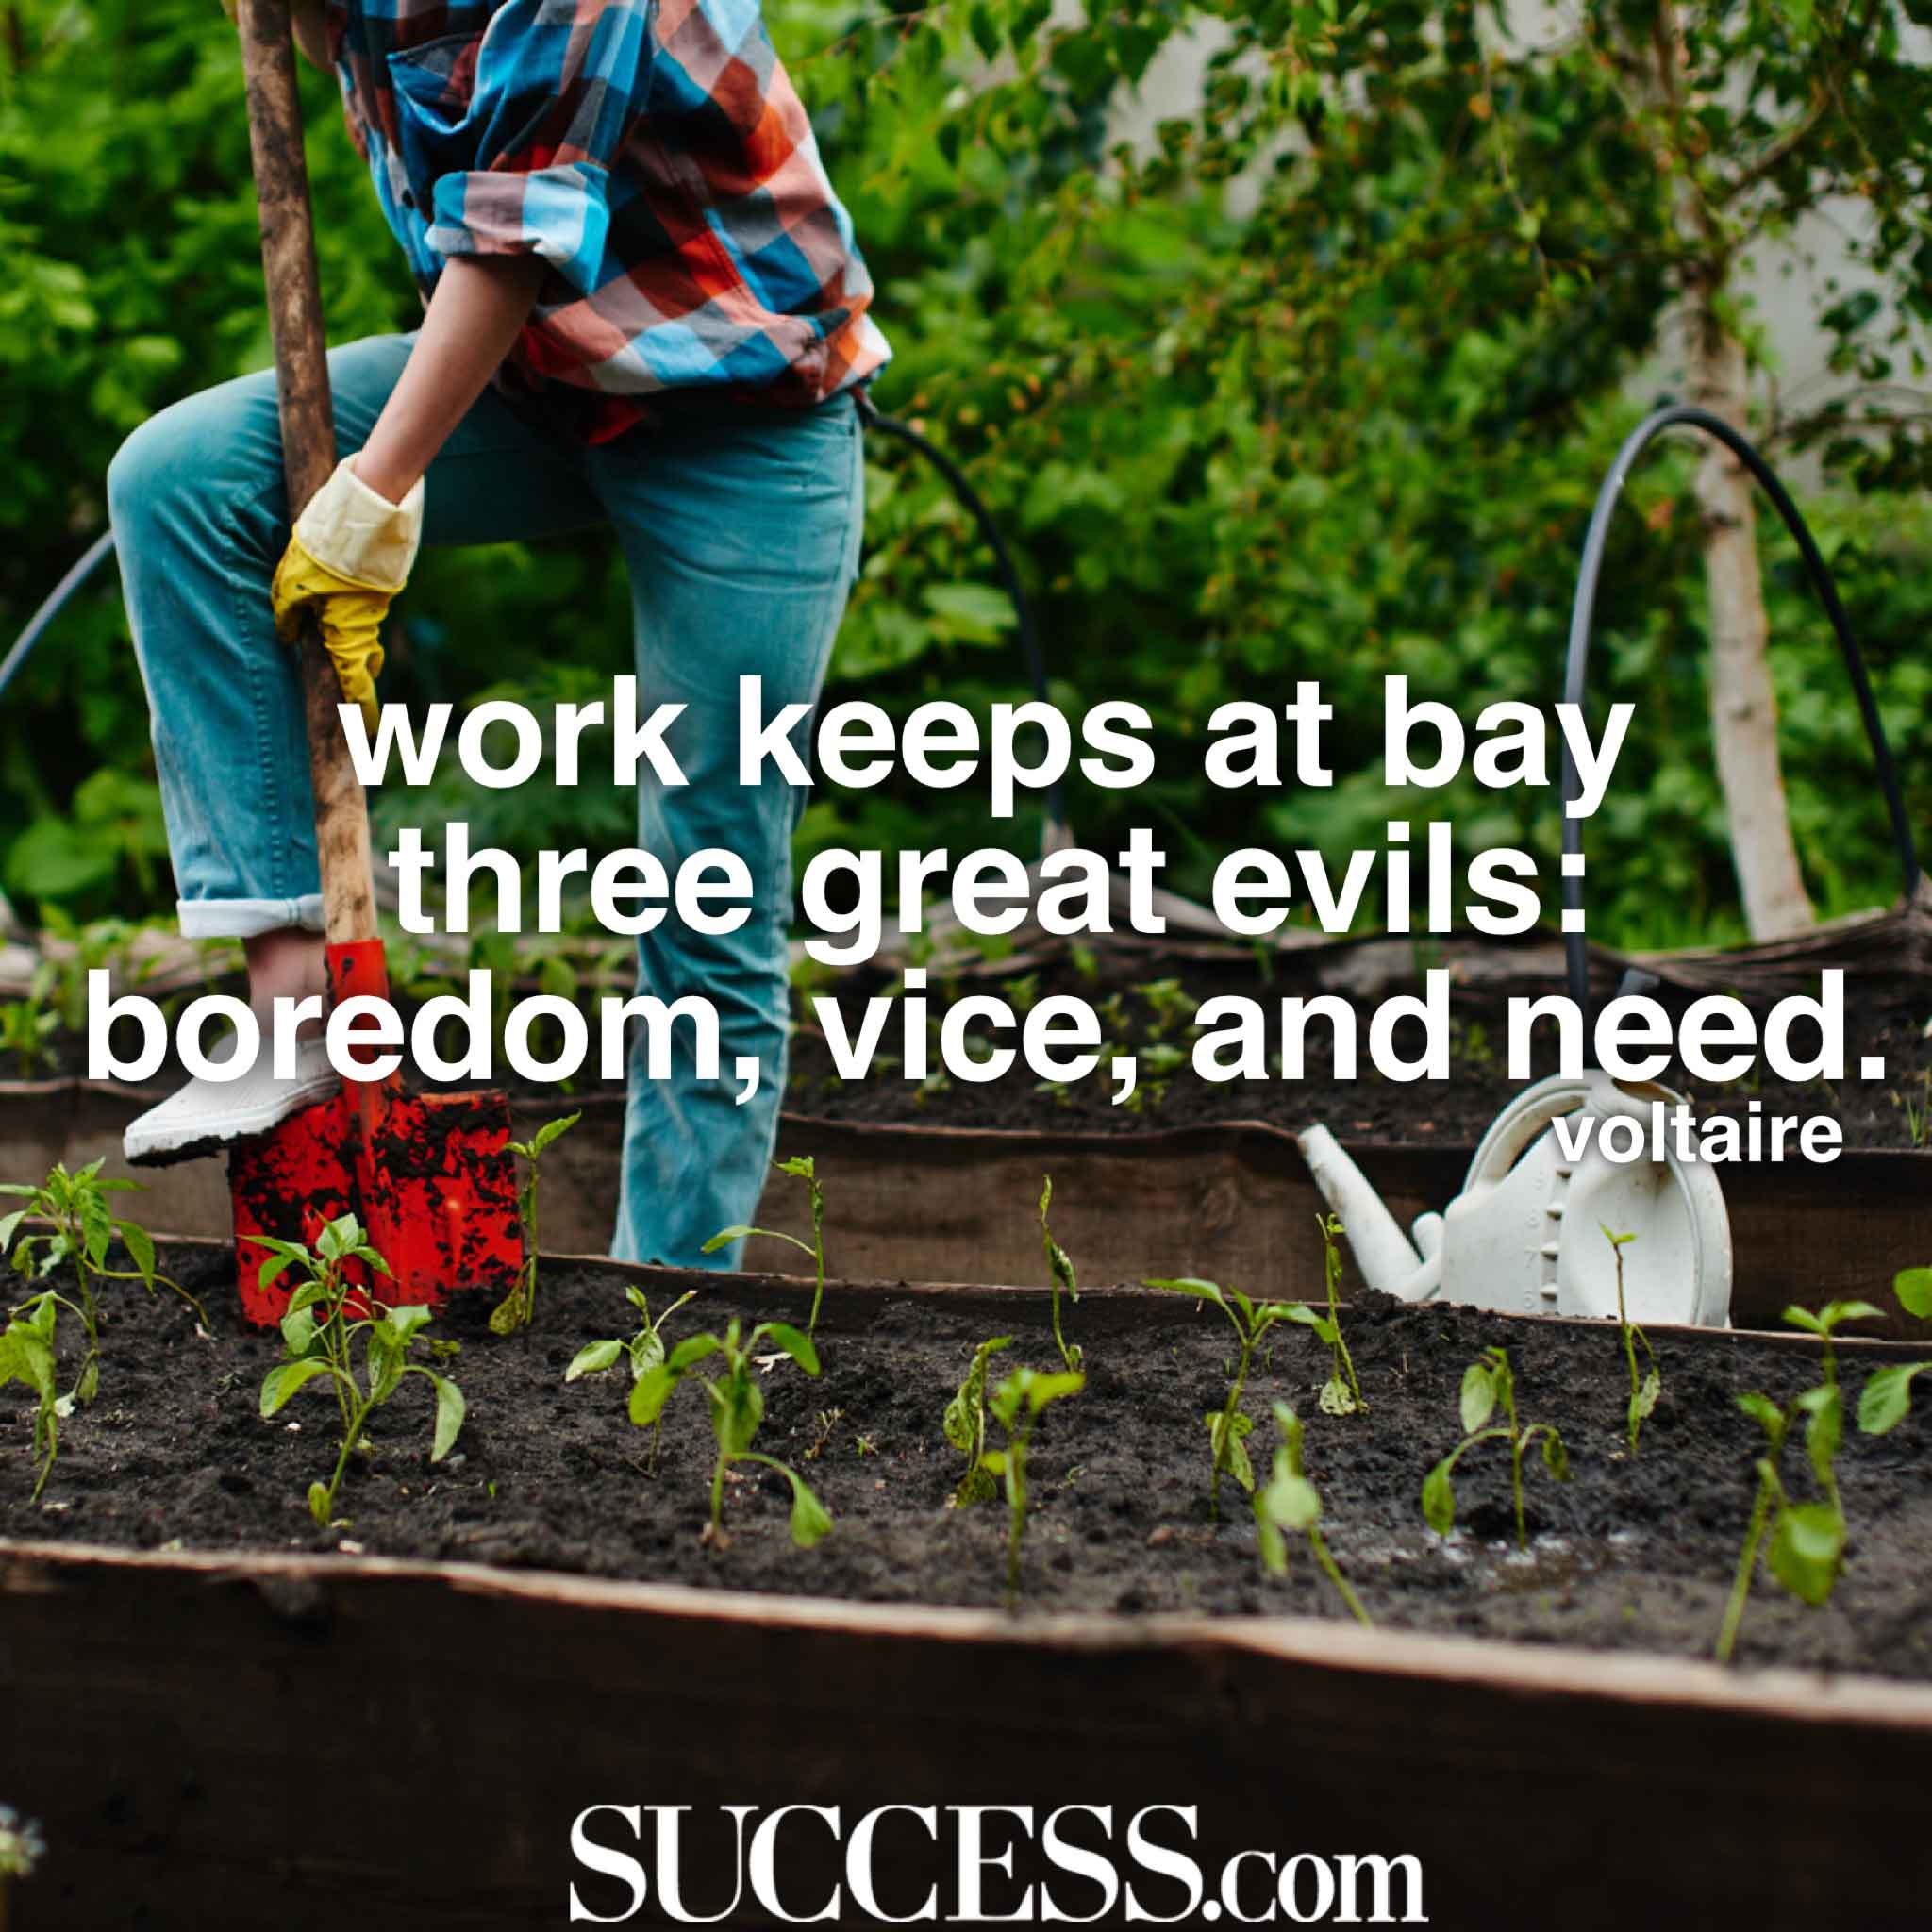 13 Quotes to Celebrate Your Hard Work